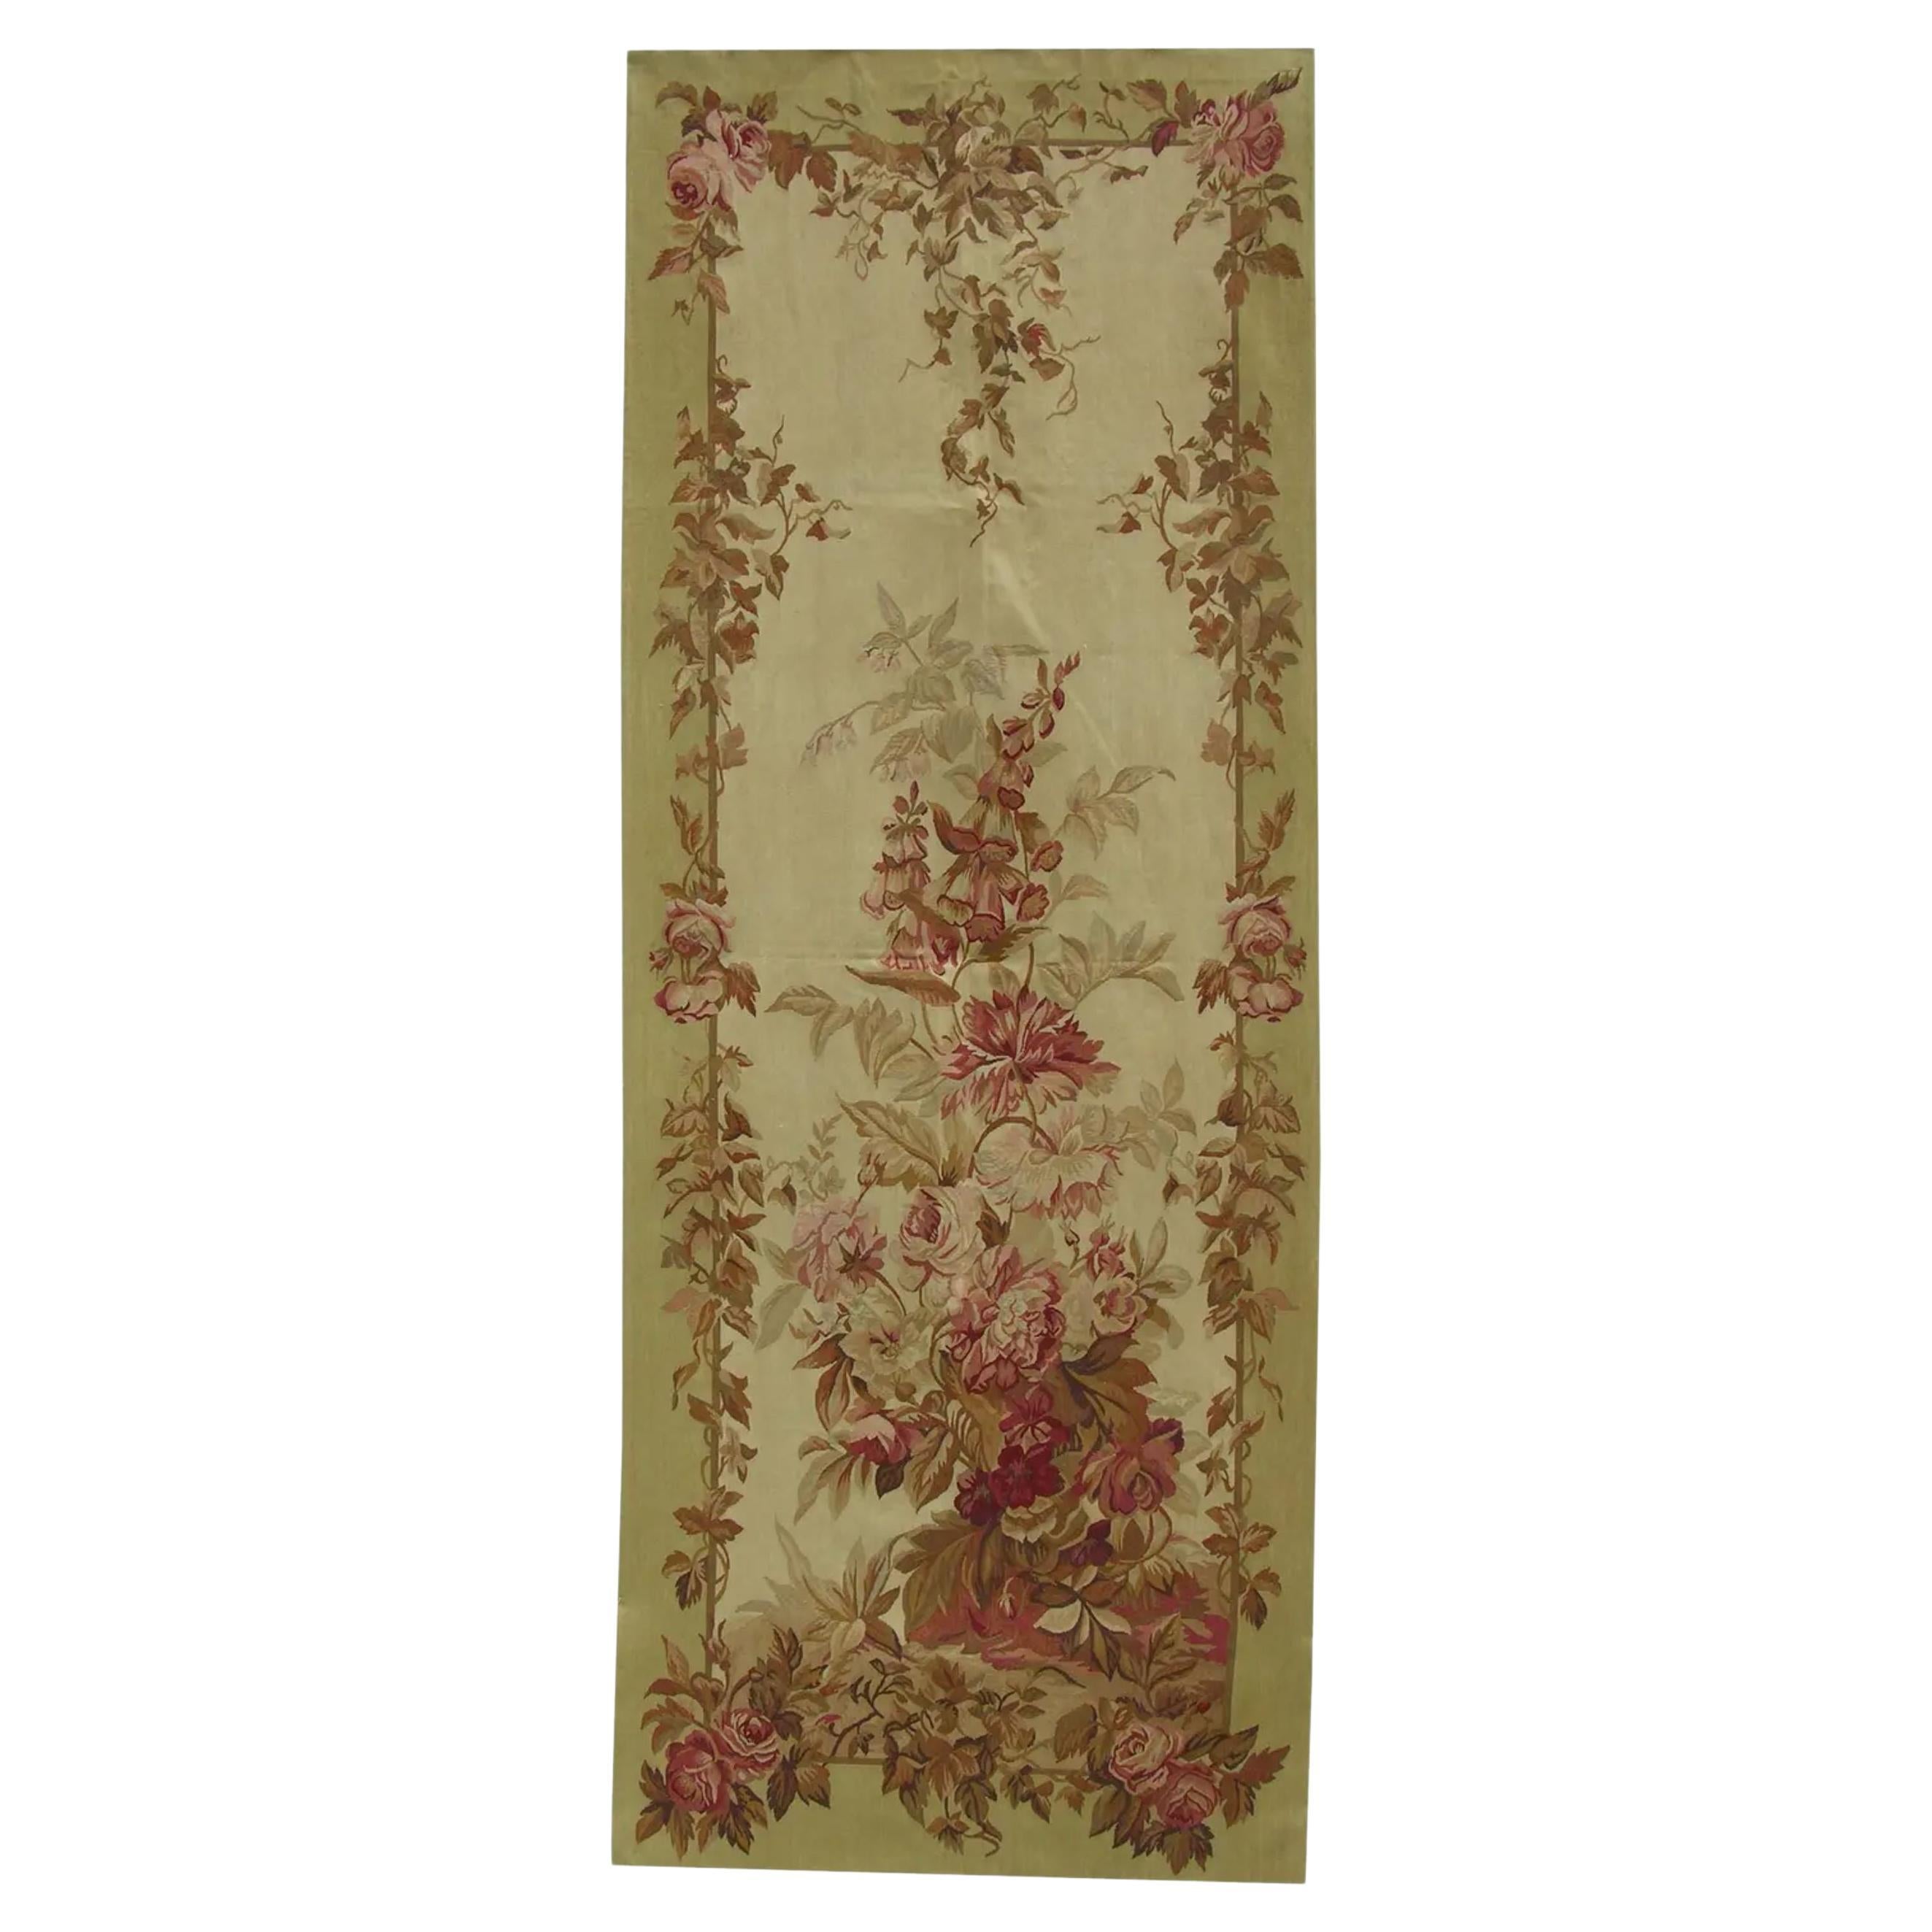 Vintage Floral Tapestry in Red & Tan 8.1X3.1 For Sale